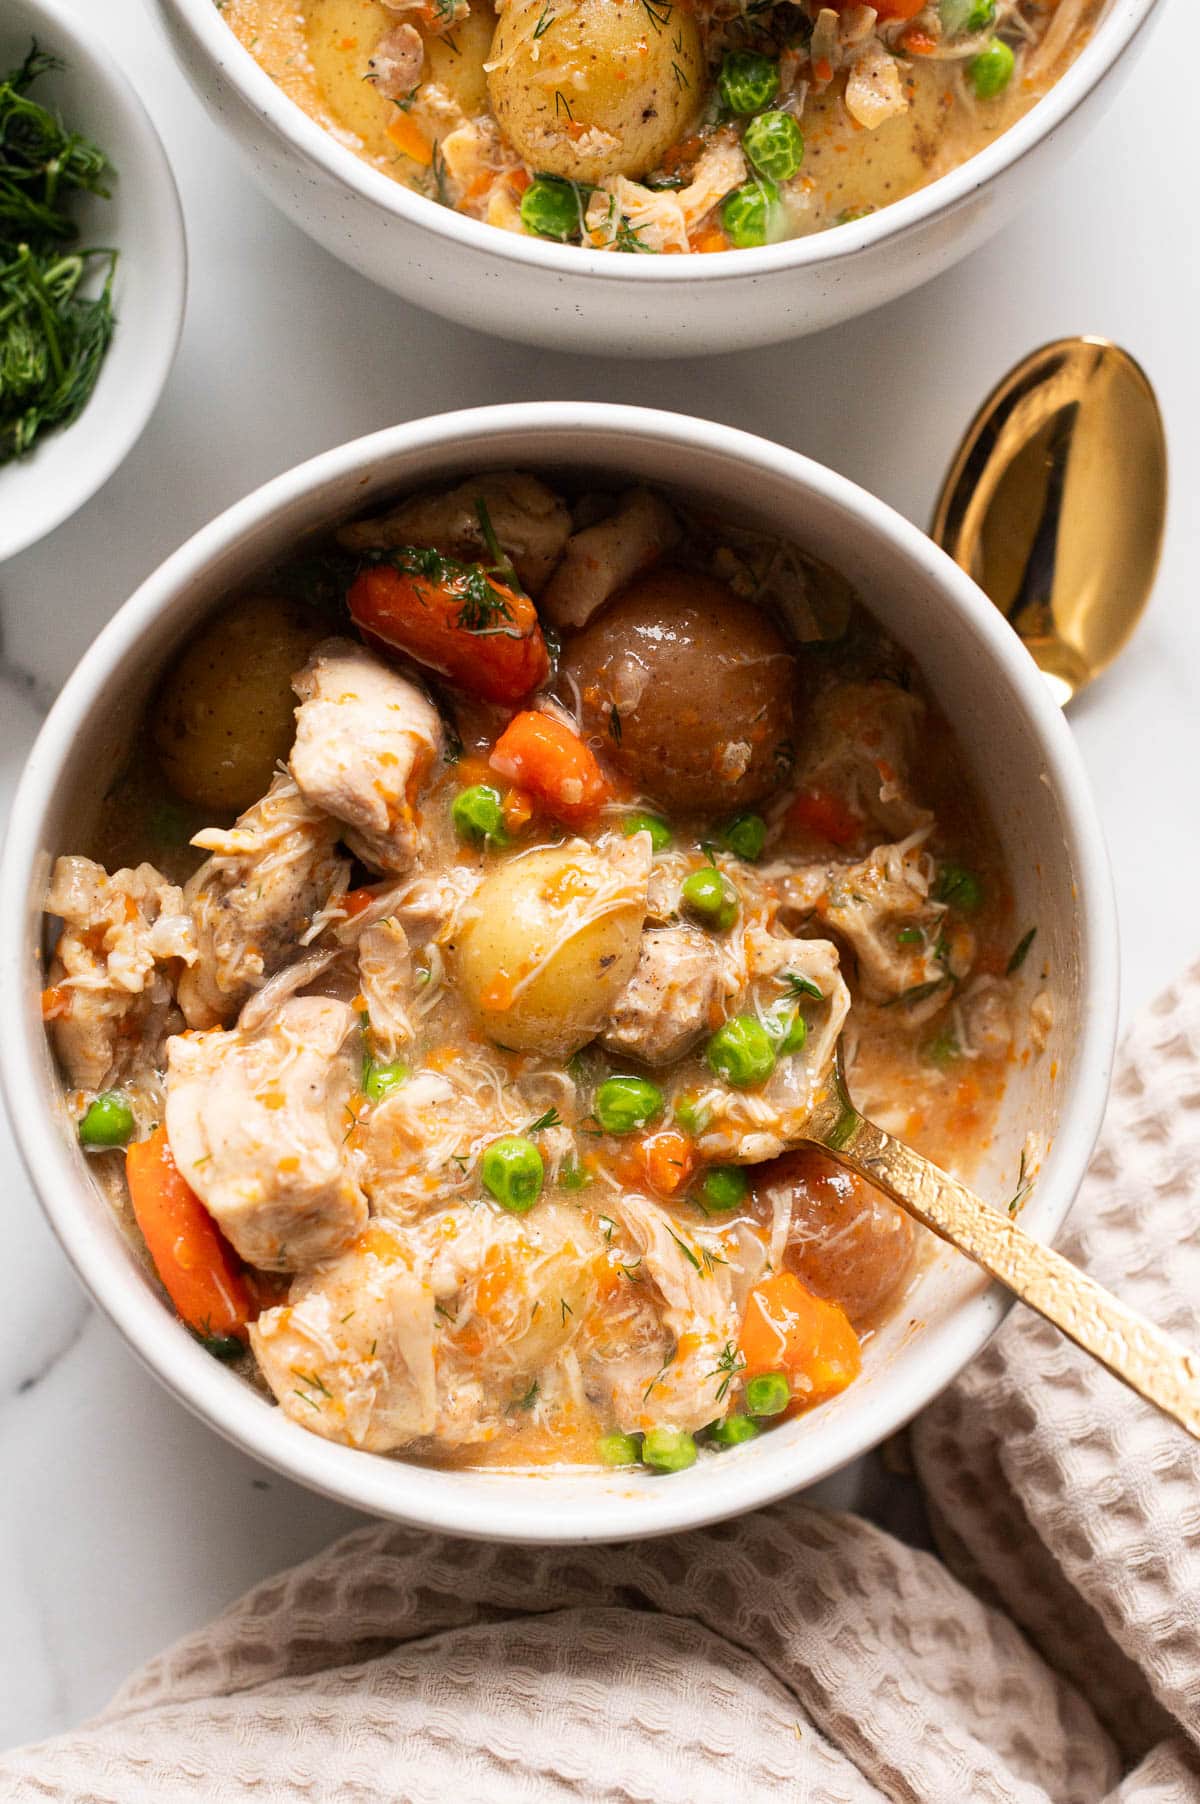 Chicken stew served in a bowl with a spoon.